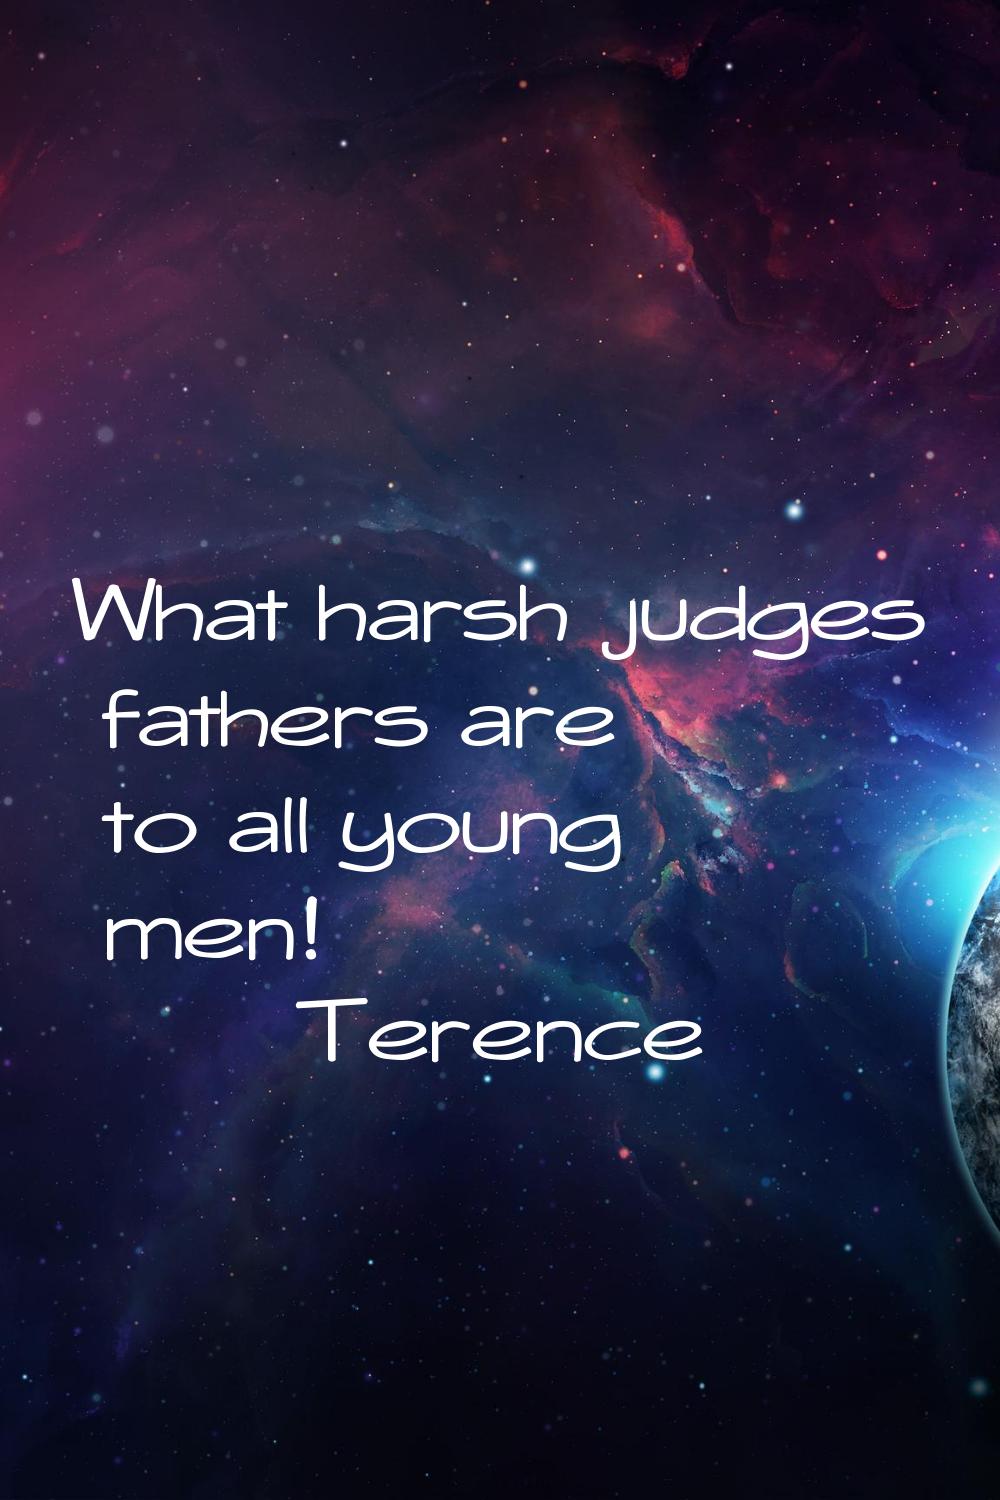 What harsh judges fathers are to all young men!